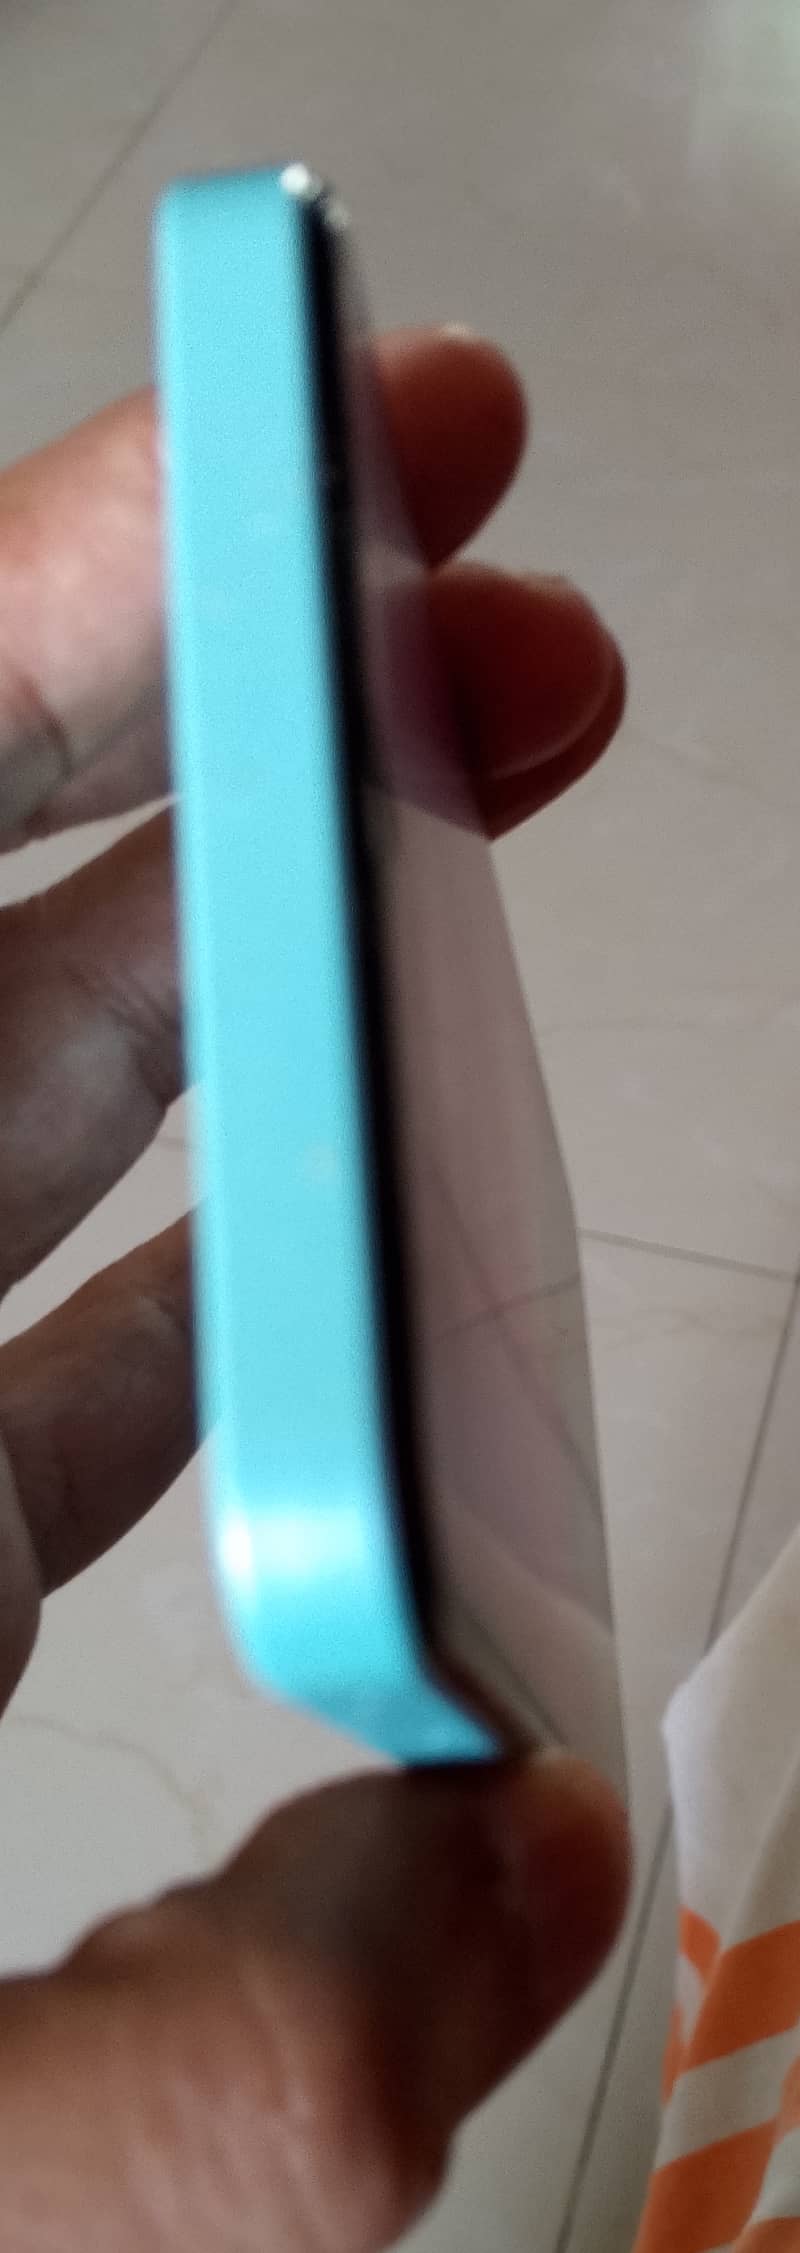 Realme C51 4GB -128GB only kit and orginal Charger 0